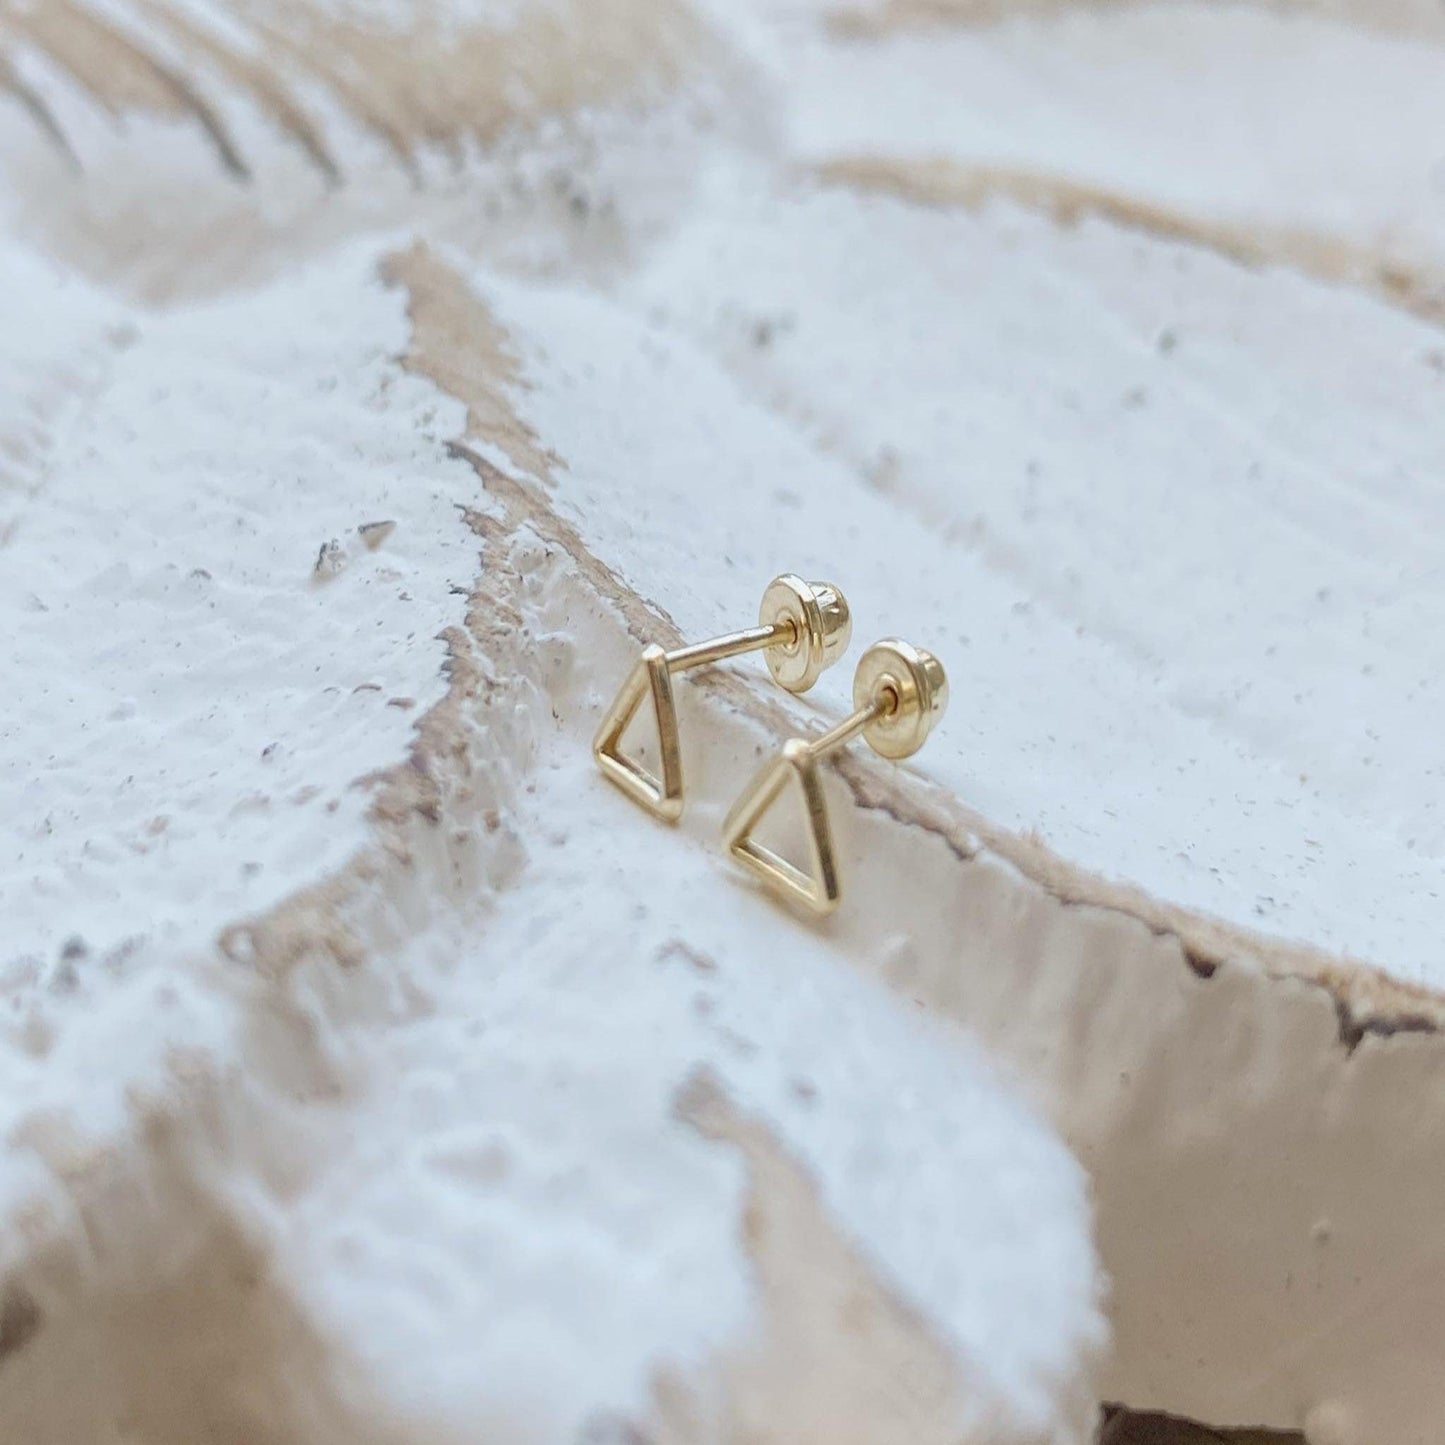 These triangle studs are a must have for your everyday earring collection. They are made from pure 10K gold and make a perfect minimalist statement.